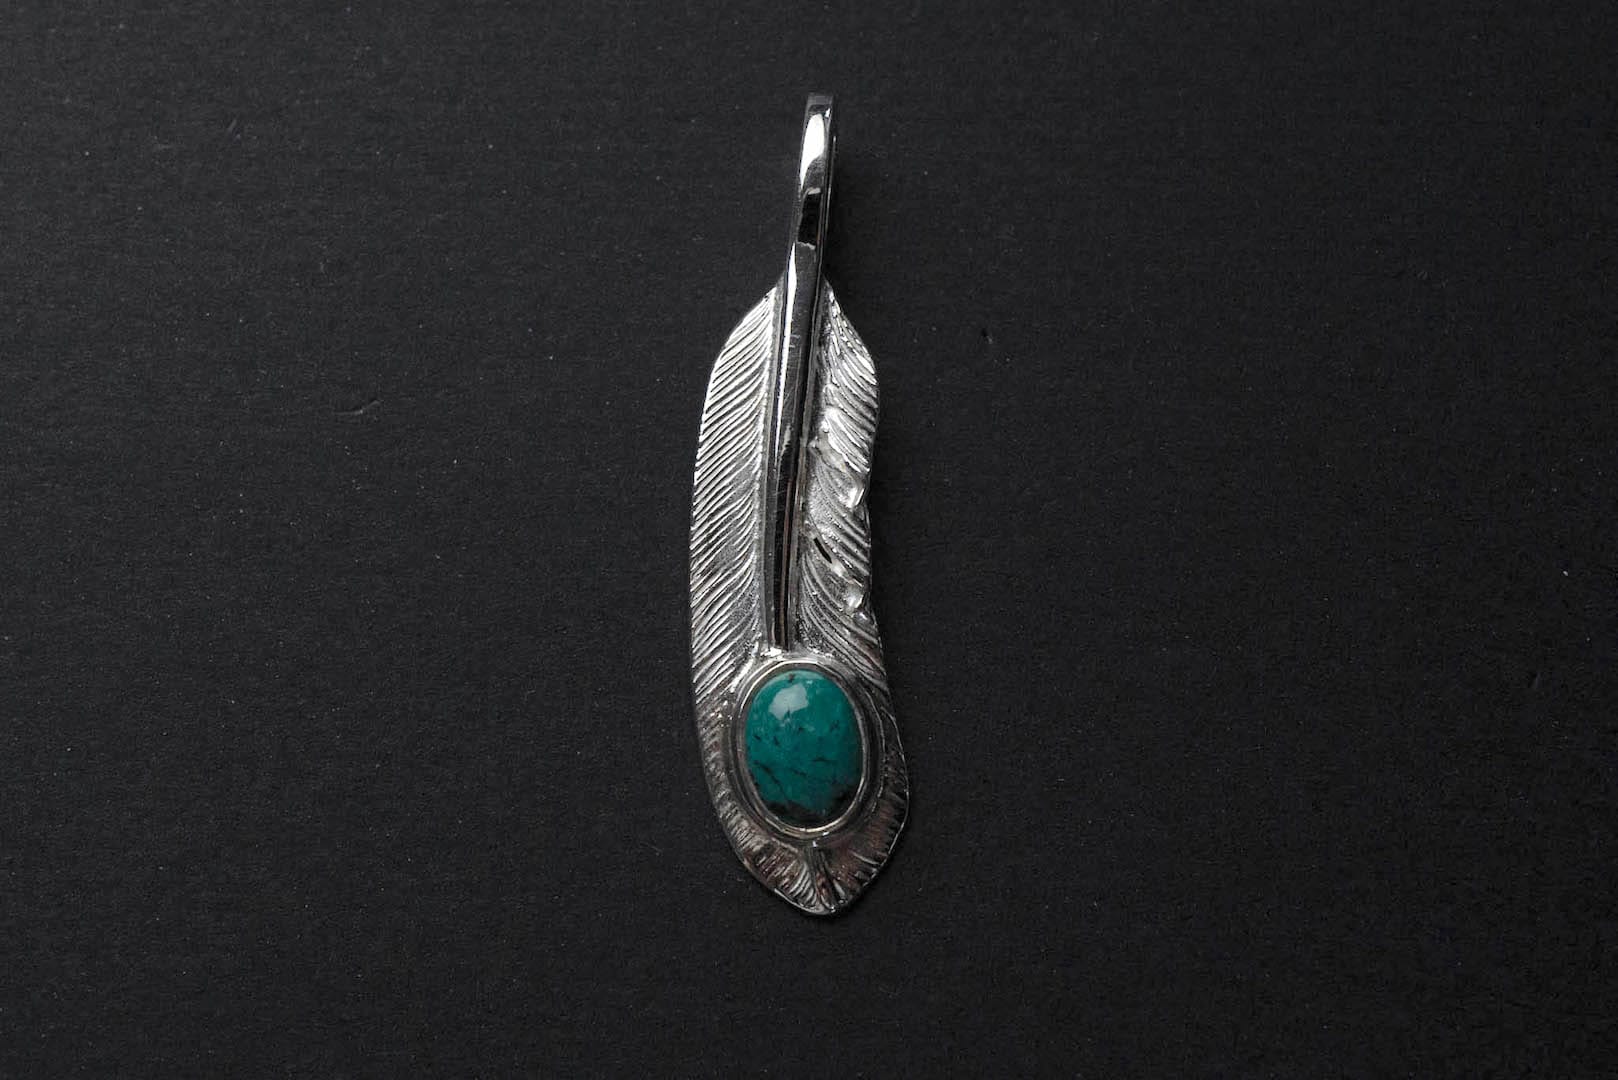 First Arrow's "Small Feather With Turquoise" Pendant (P-006-TUR)